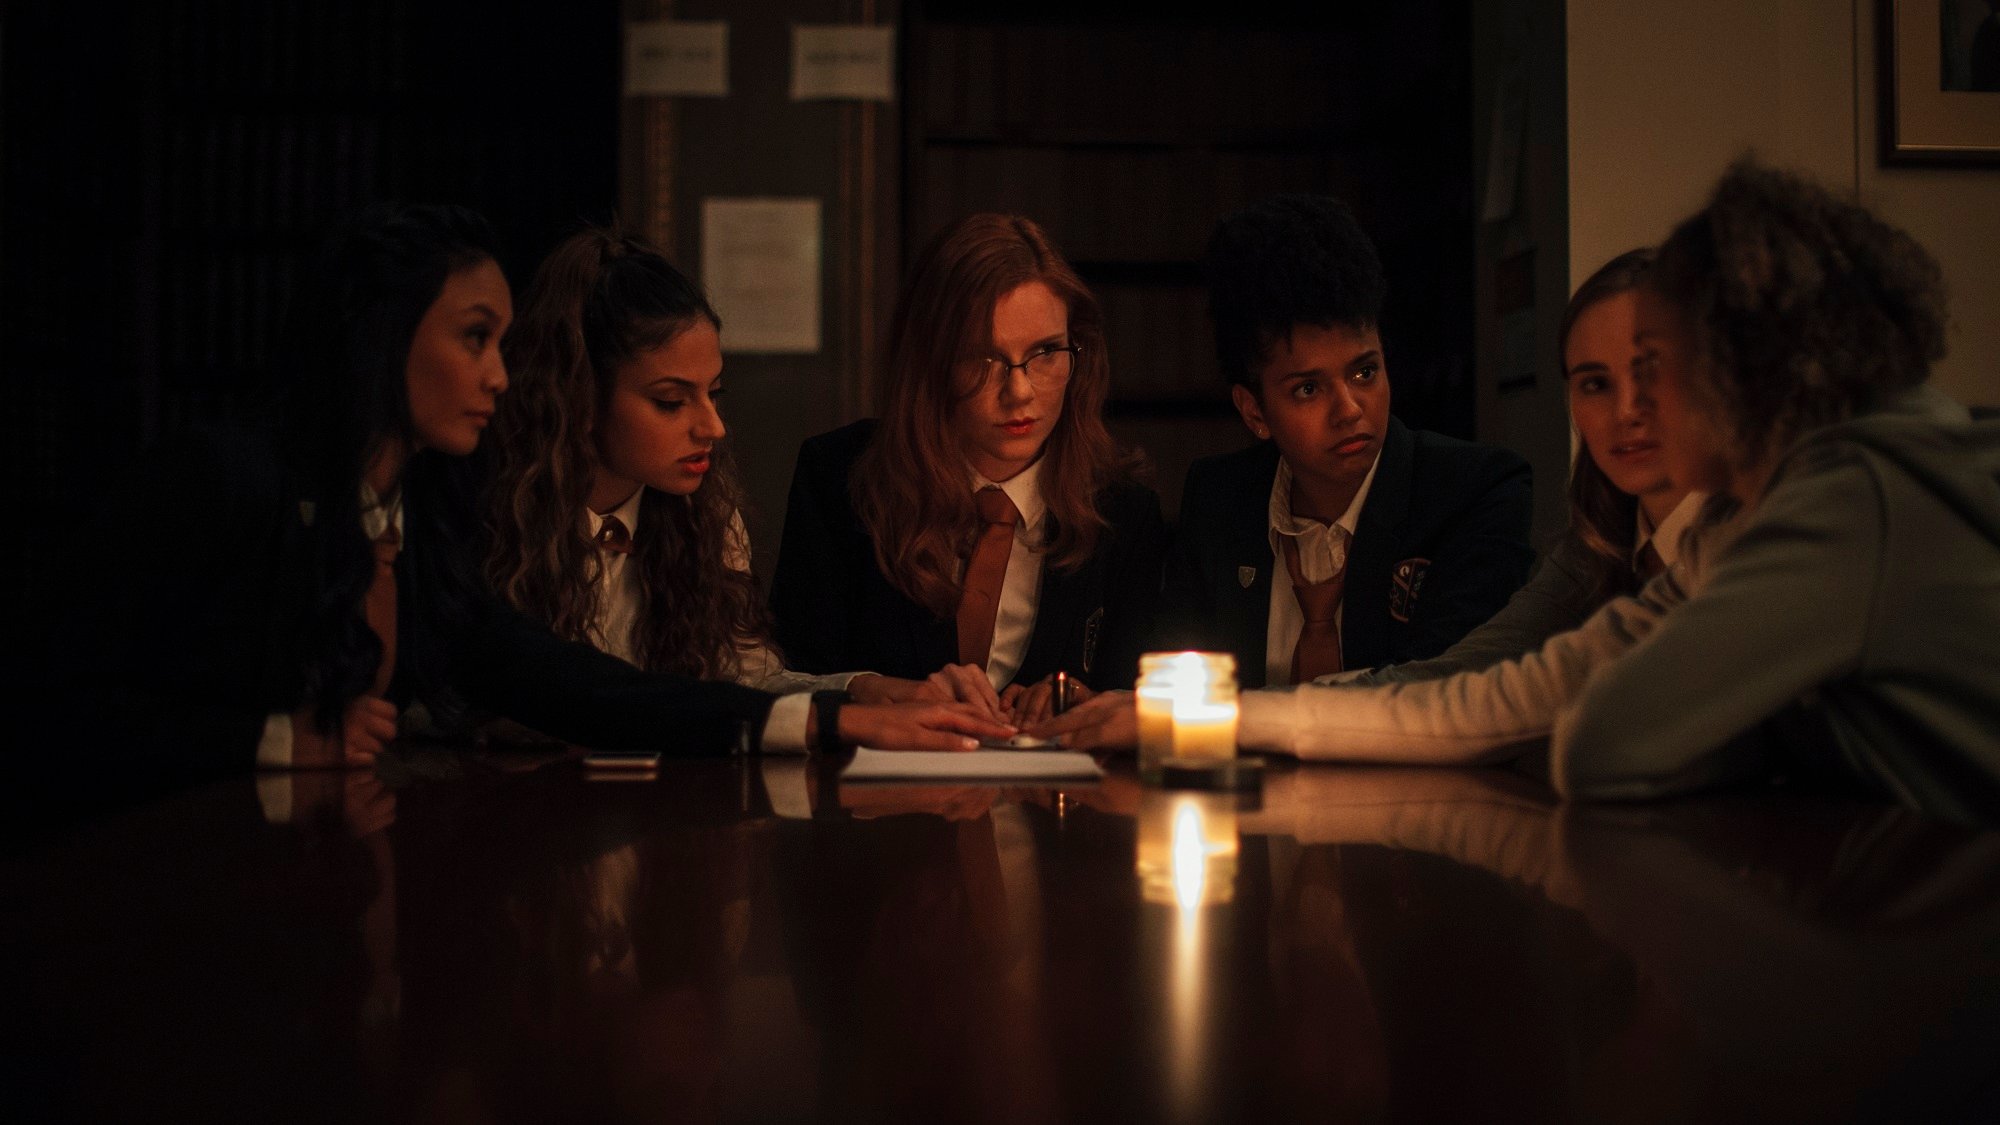 Seance cast plays with a Ouija board